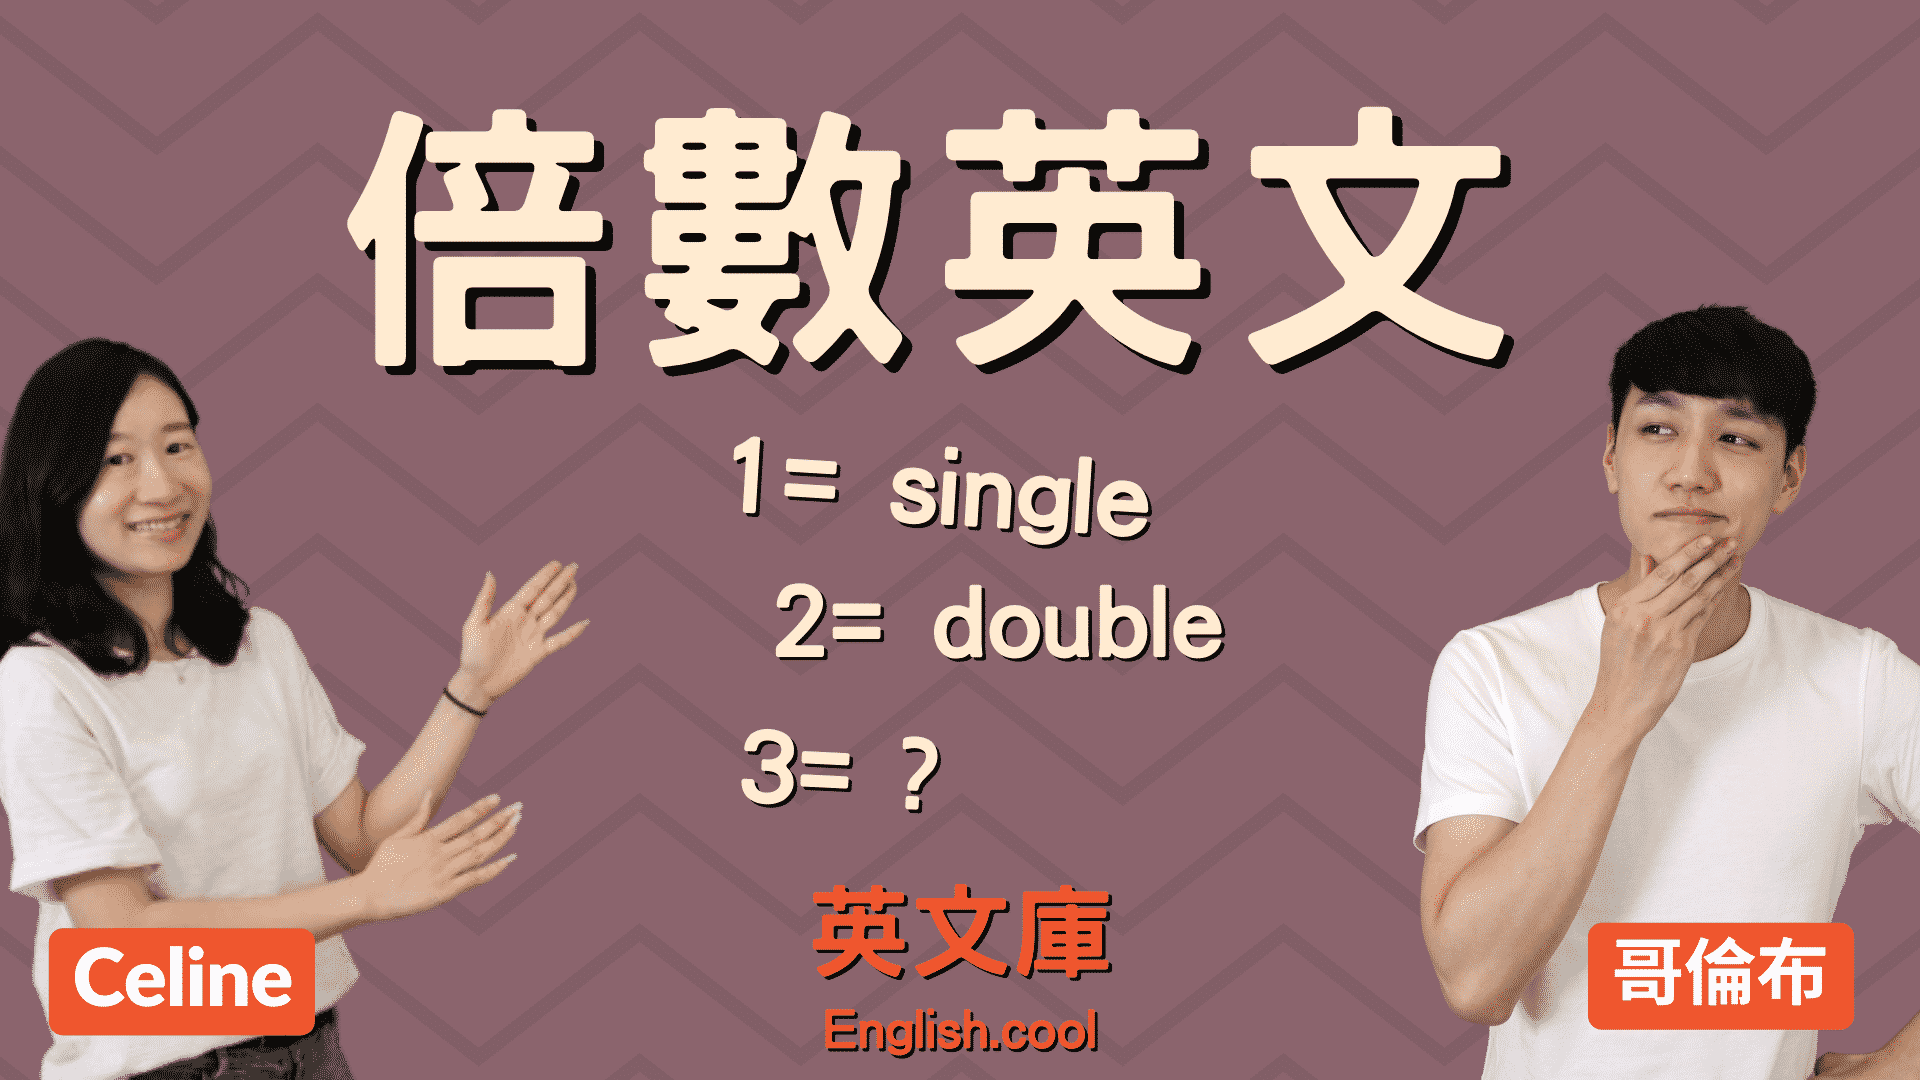 You are currently viewing 【倍數英文】Single, Double… 然後呢？